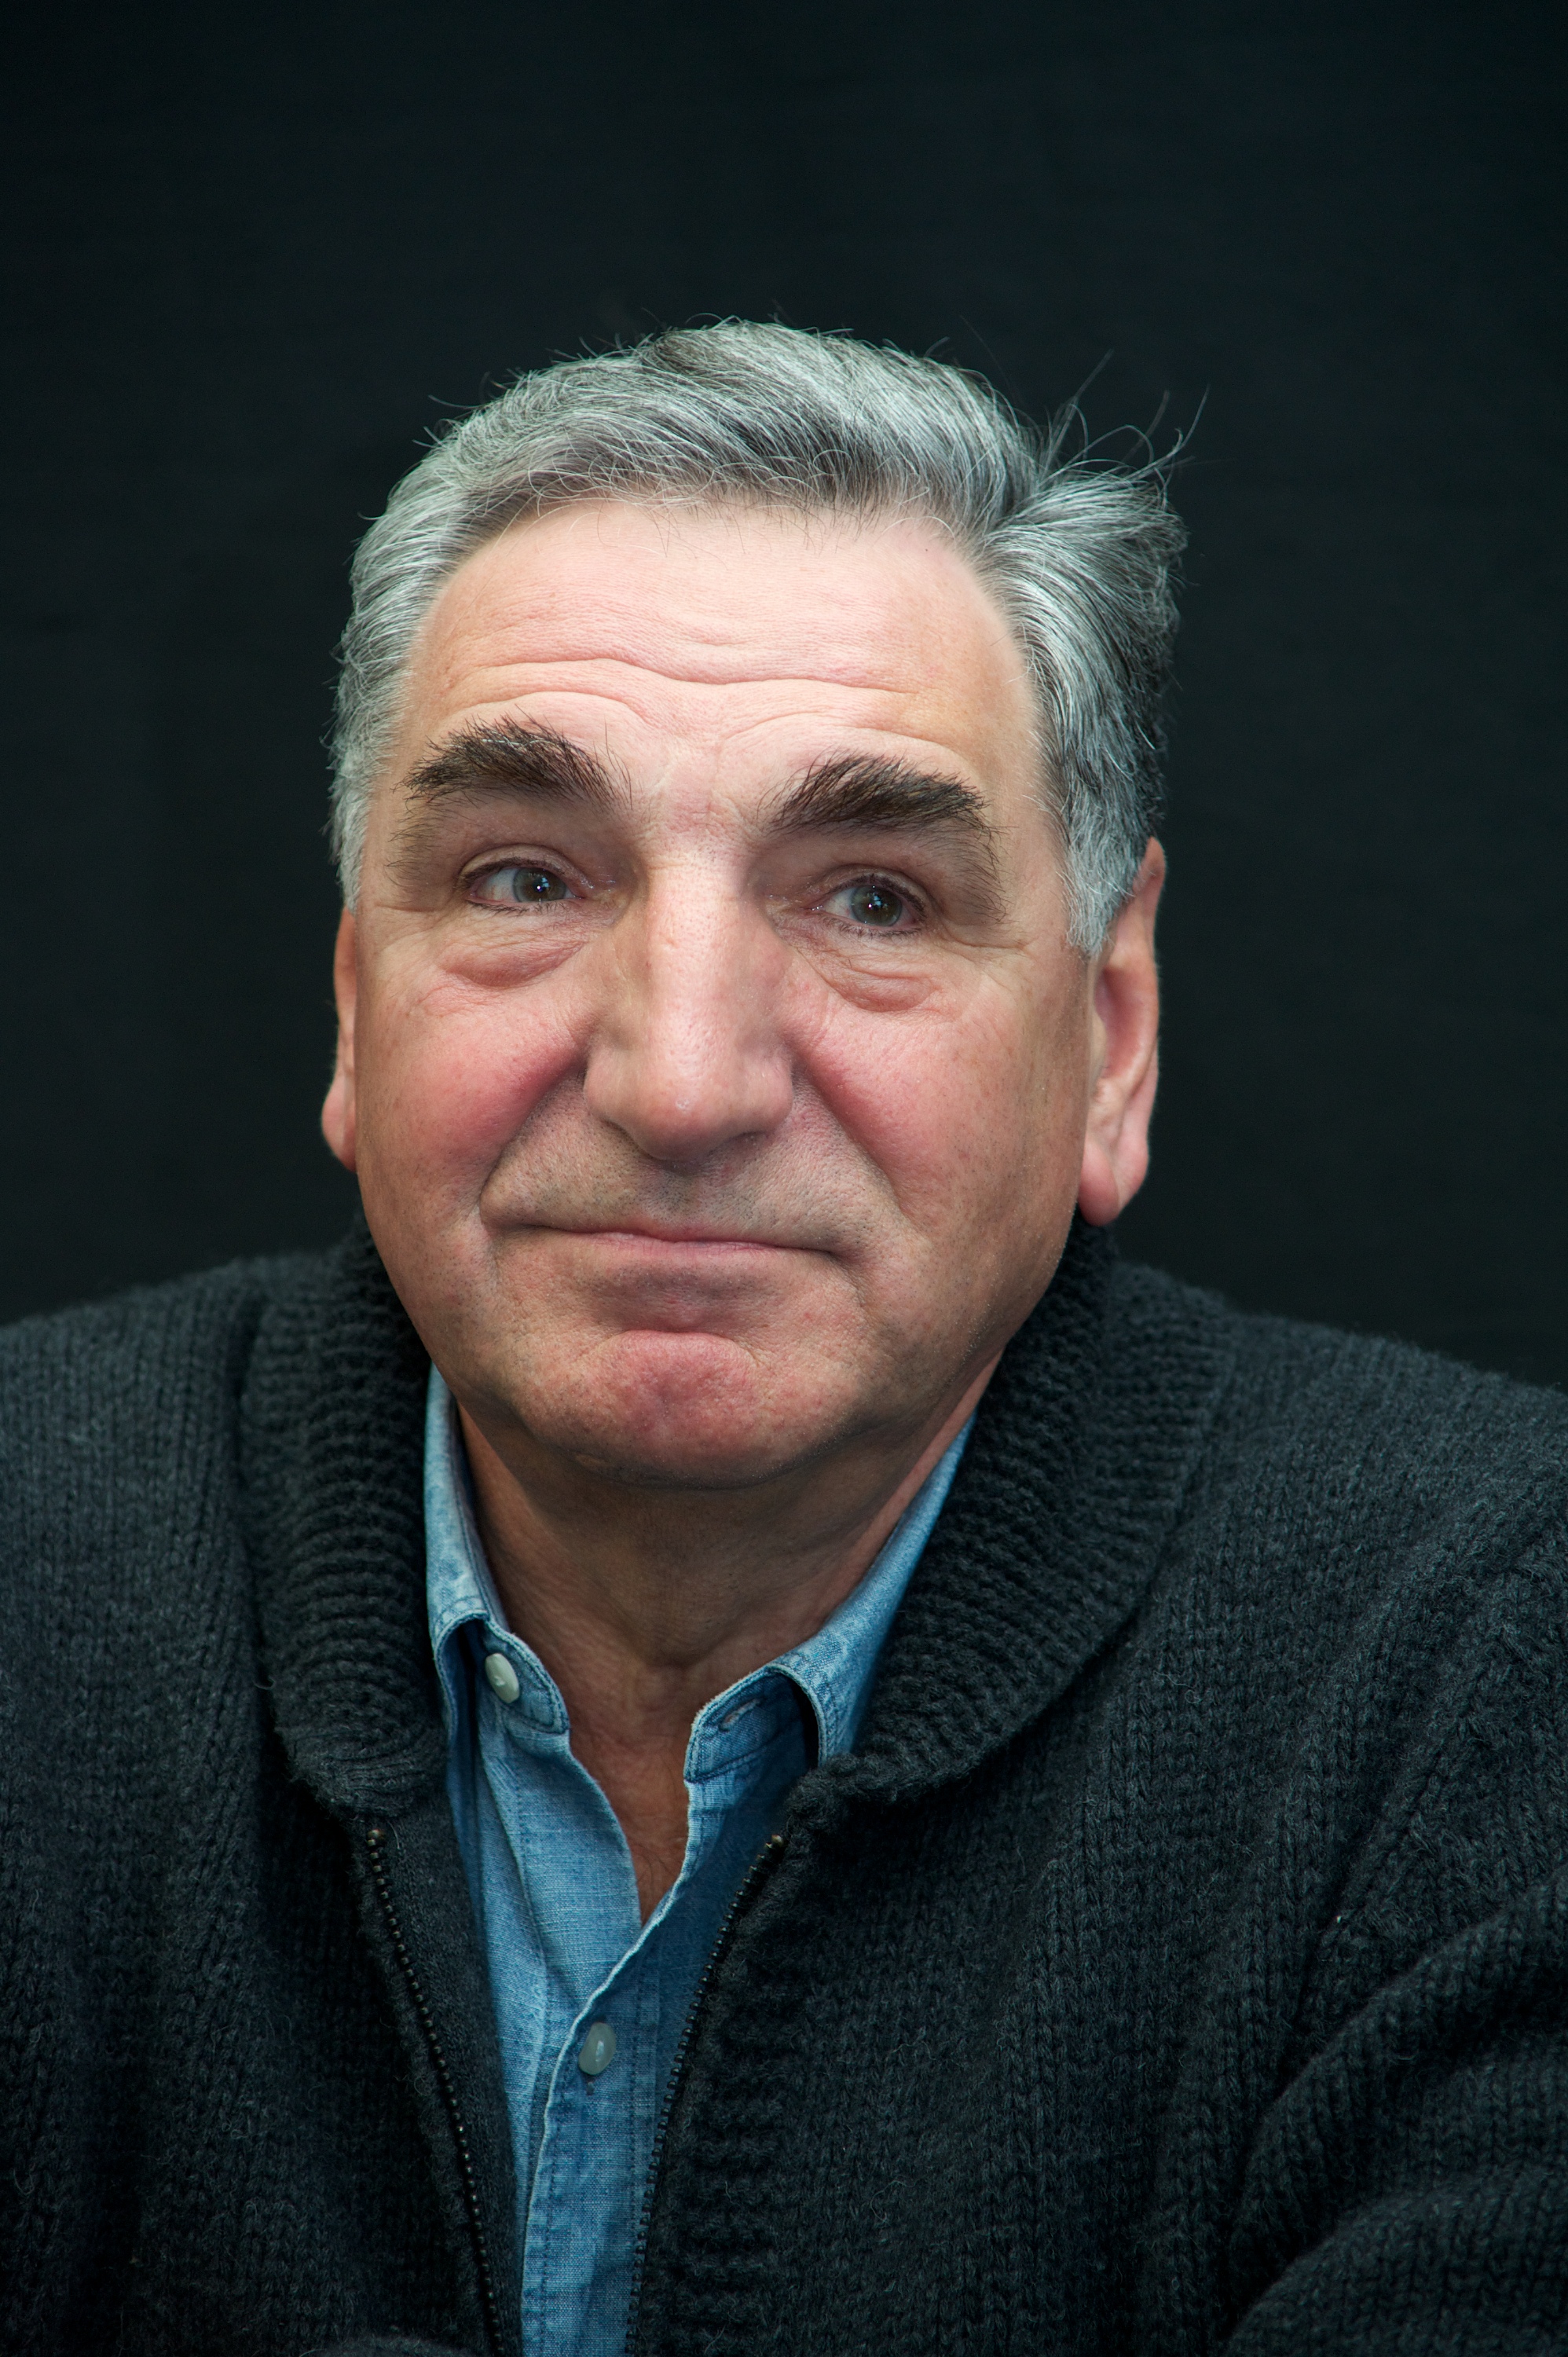 Jim Carter posed on the set of the TV series "Downton Abbey" at Highclere Castle in Newbury, England, on February 16, 2015. | Source: Getty Images